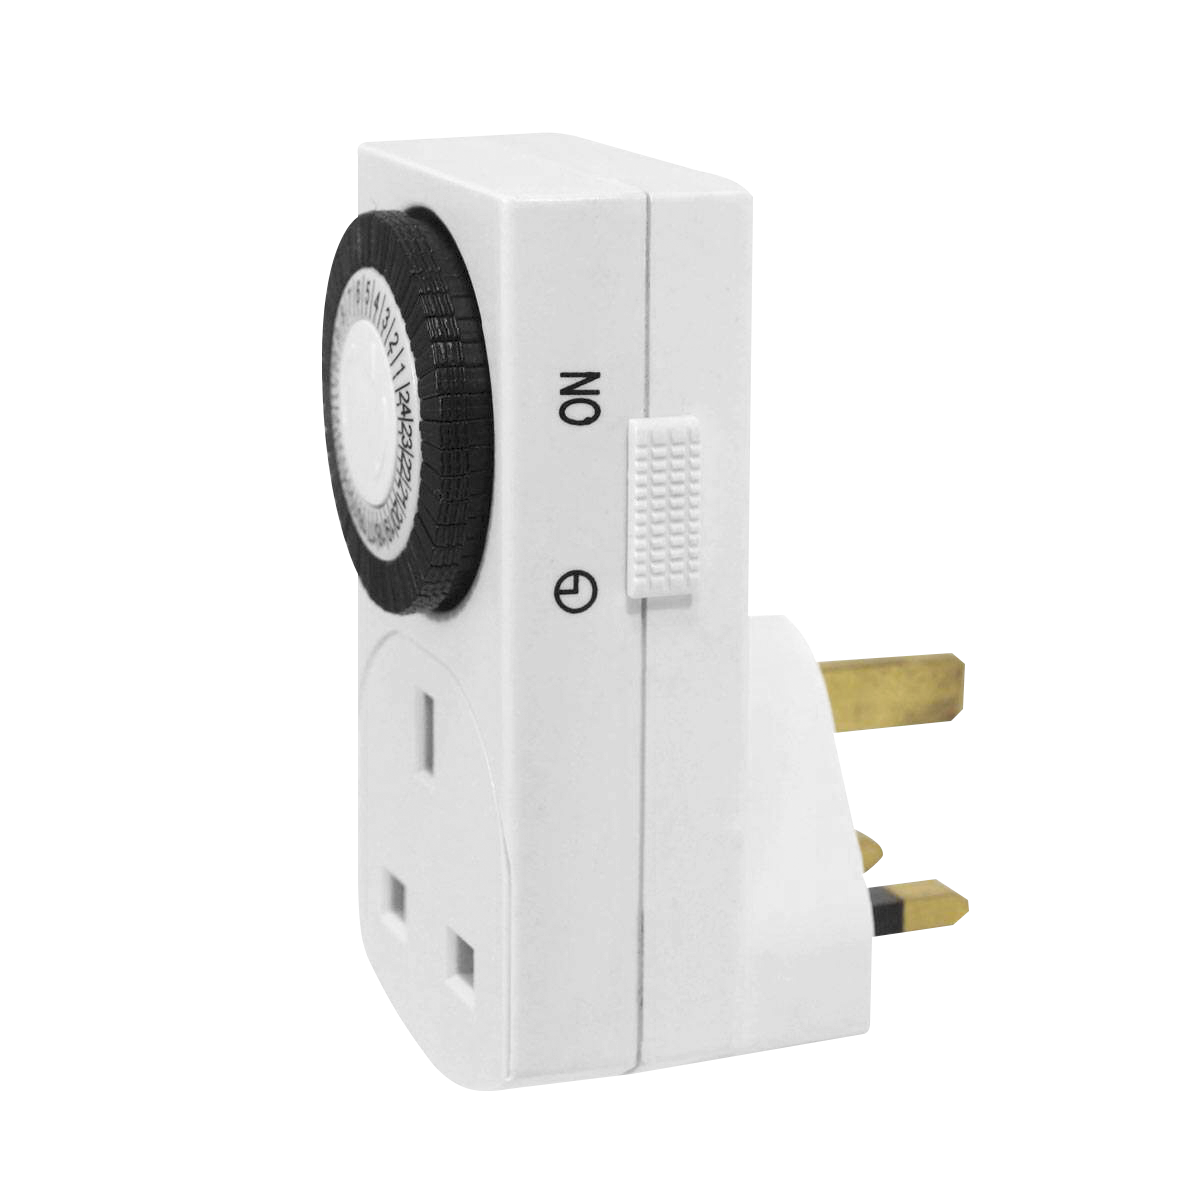 24 Hour Plug In Timer Accessory image 2